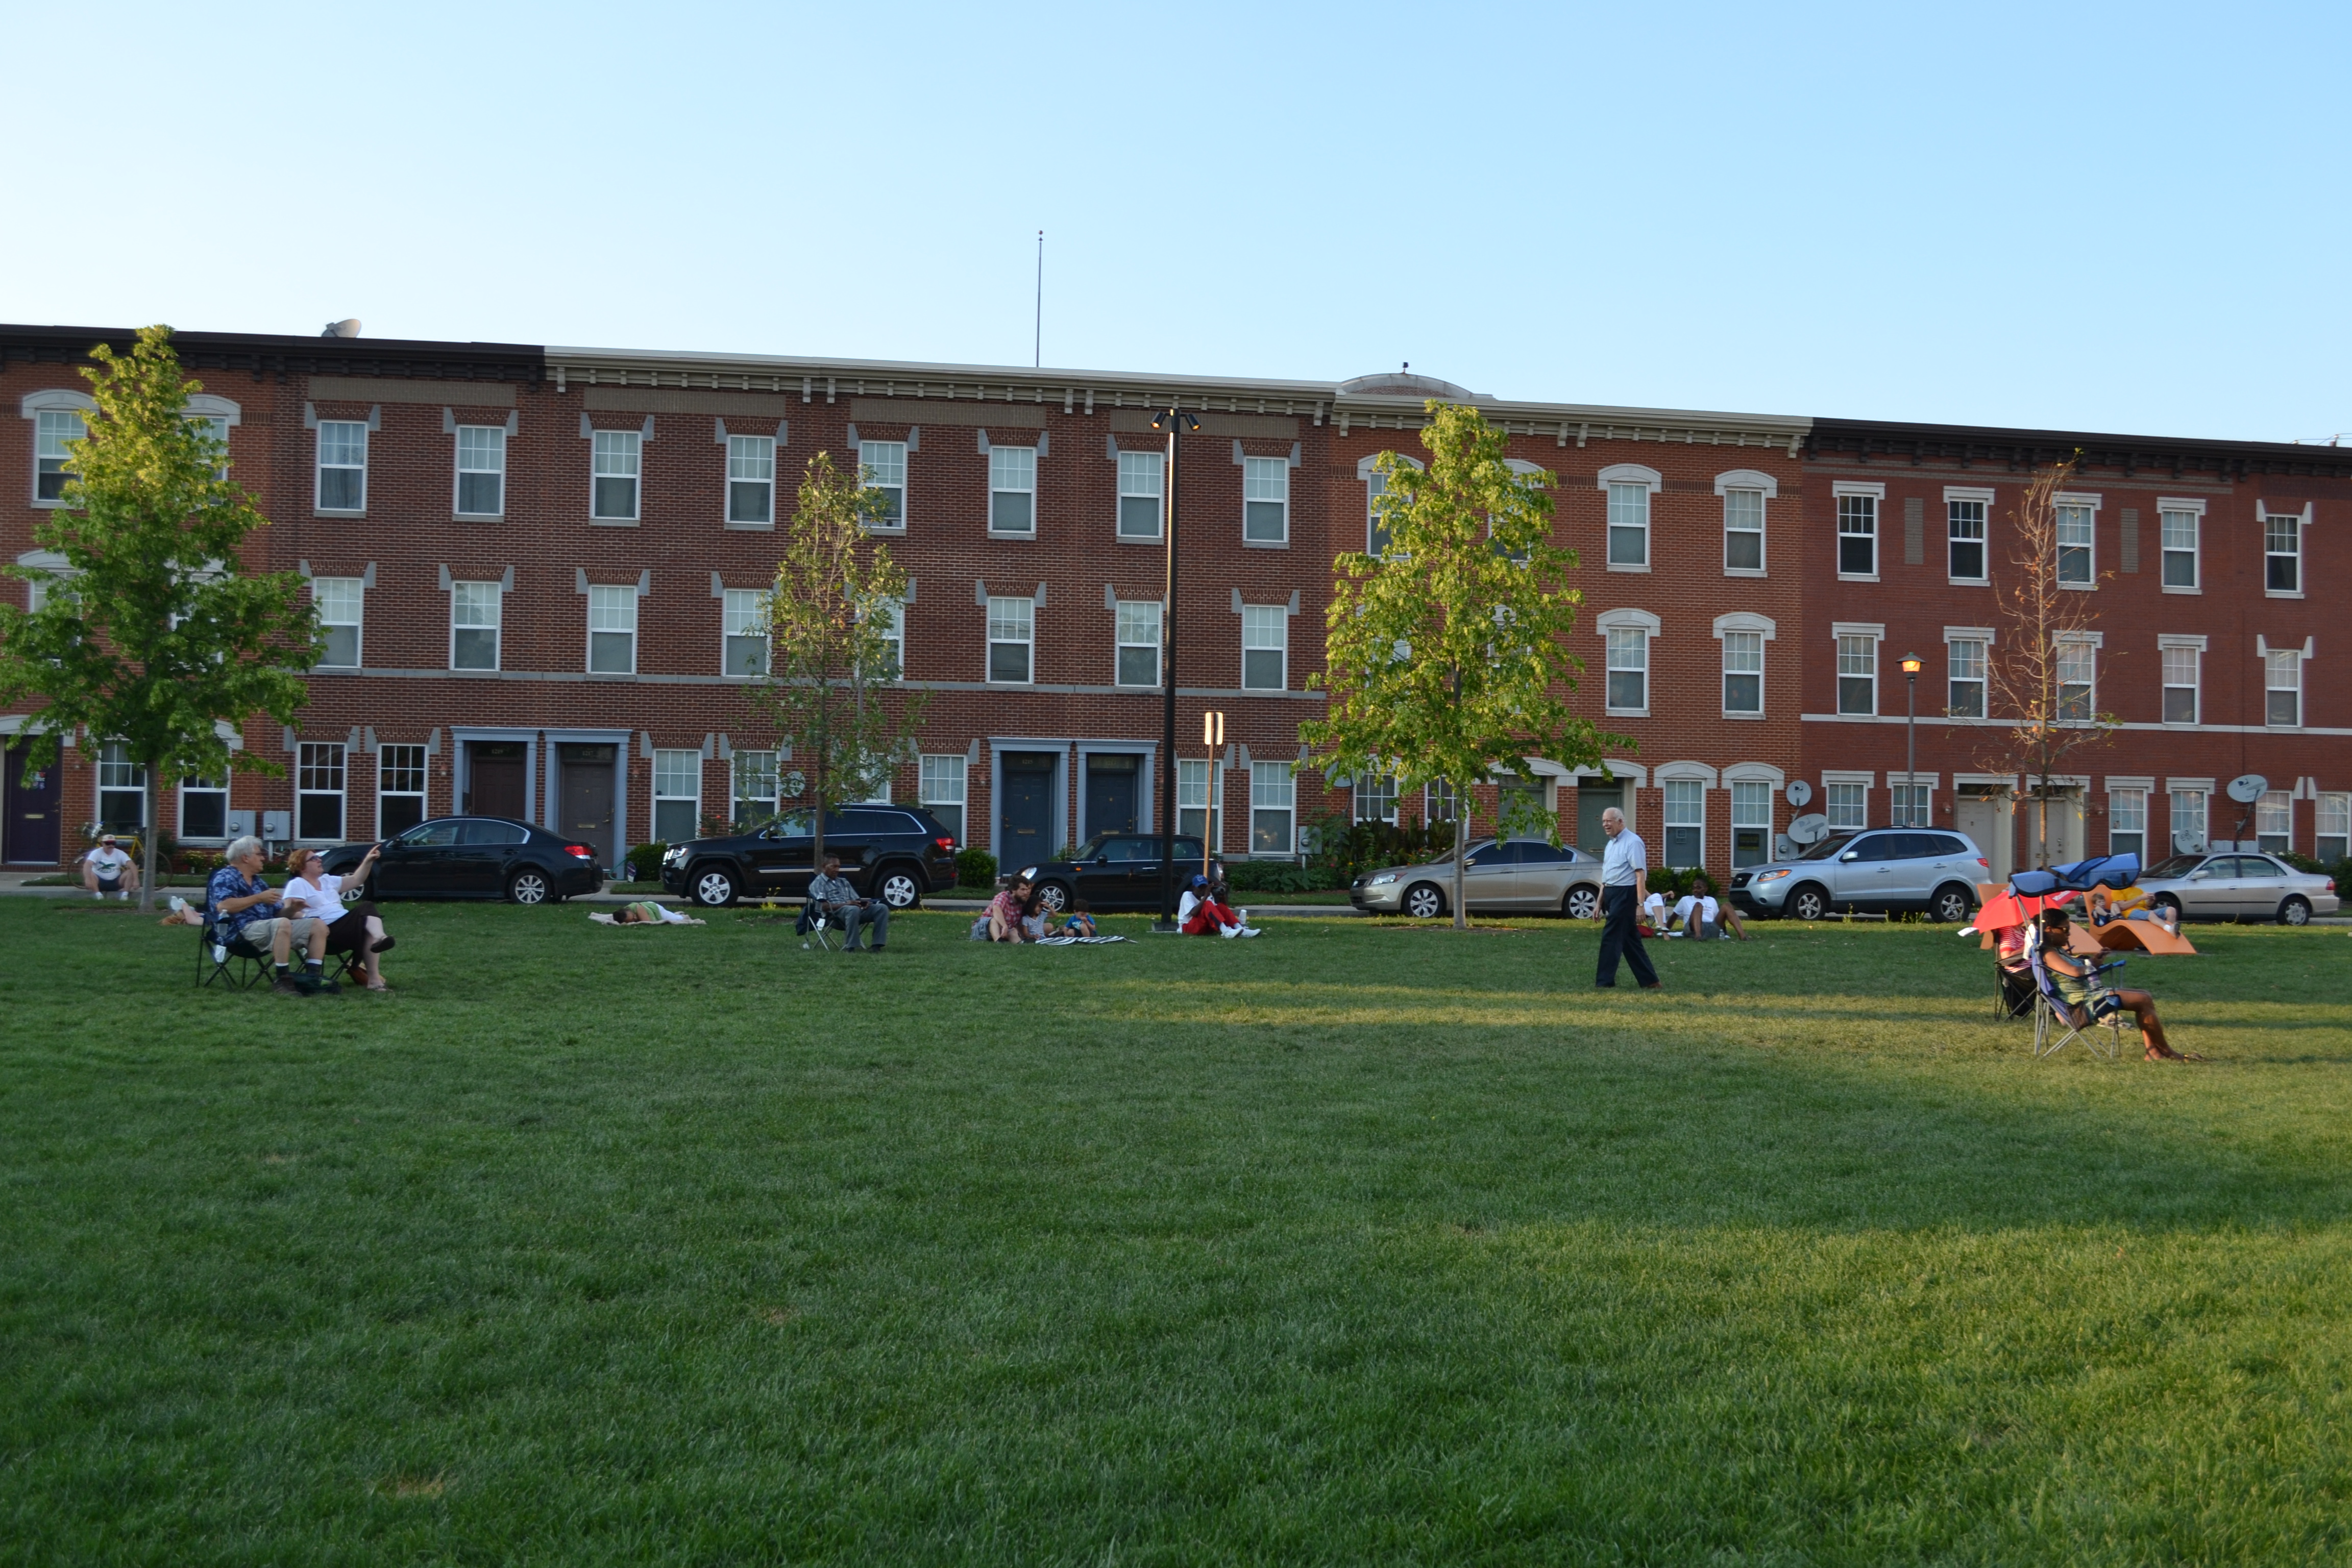 Today the park is surrounded by brick row homes